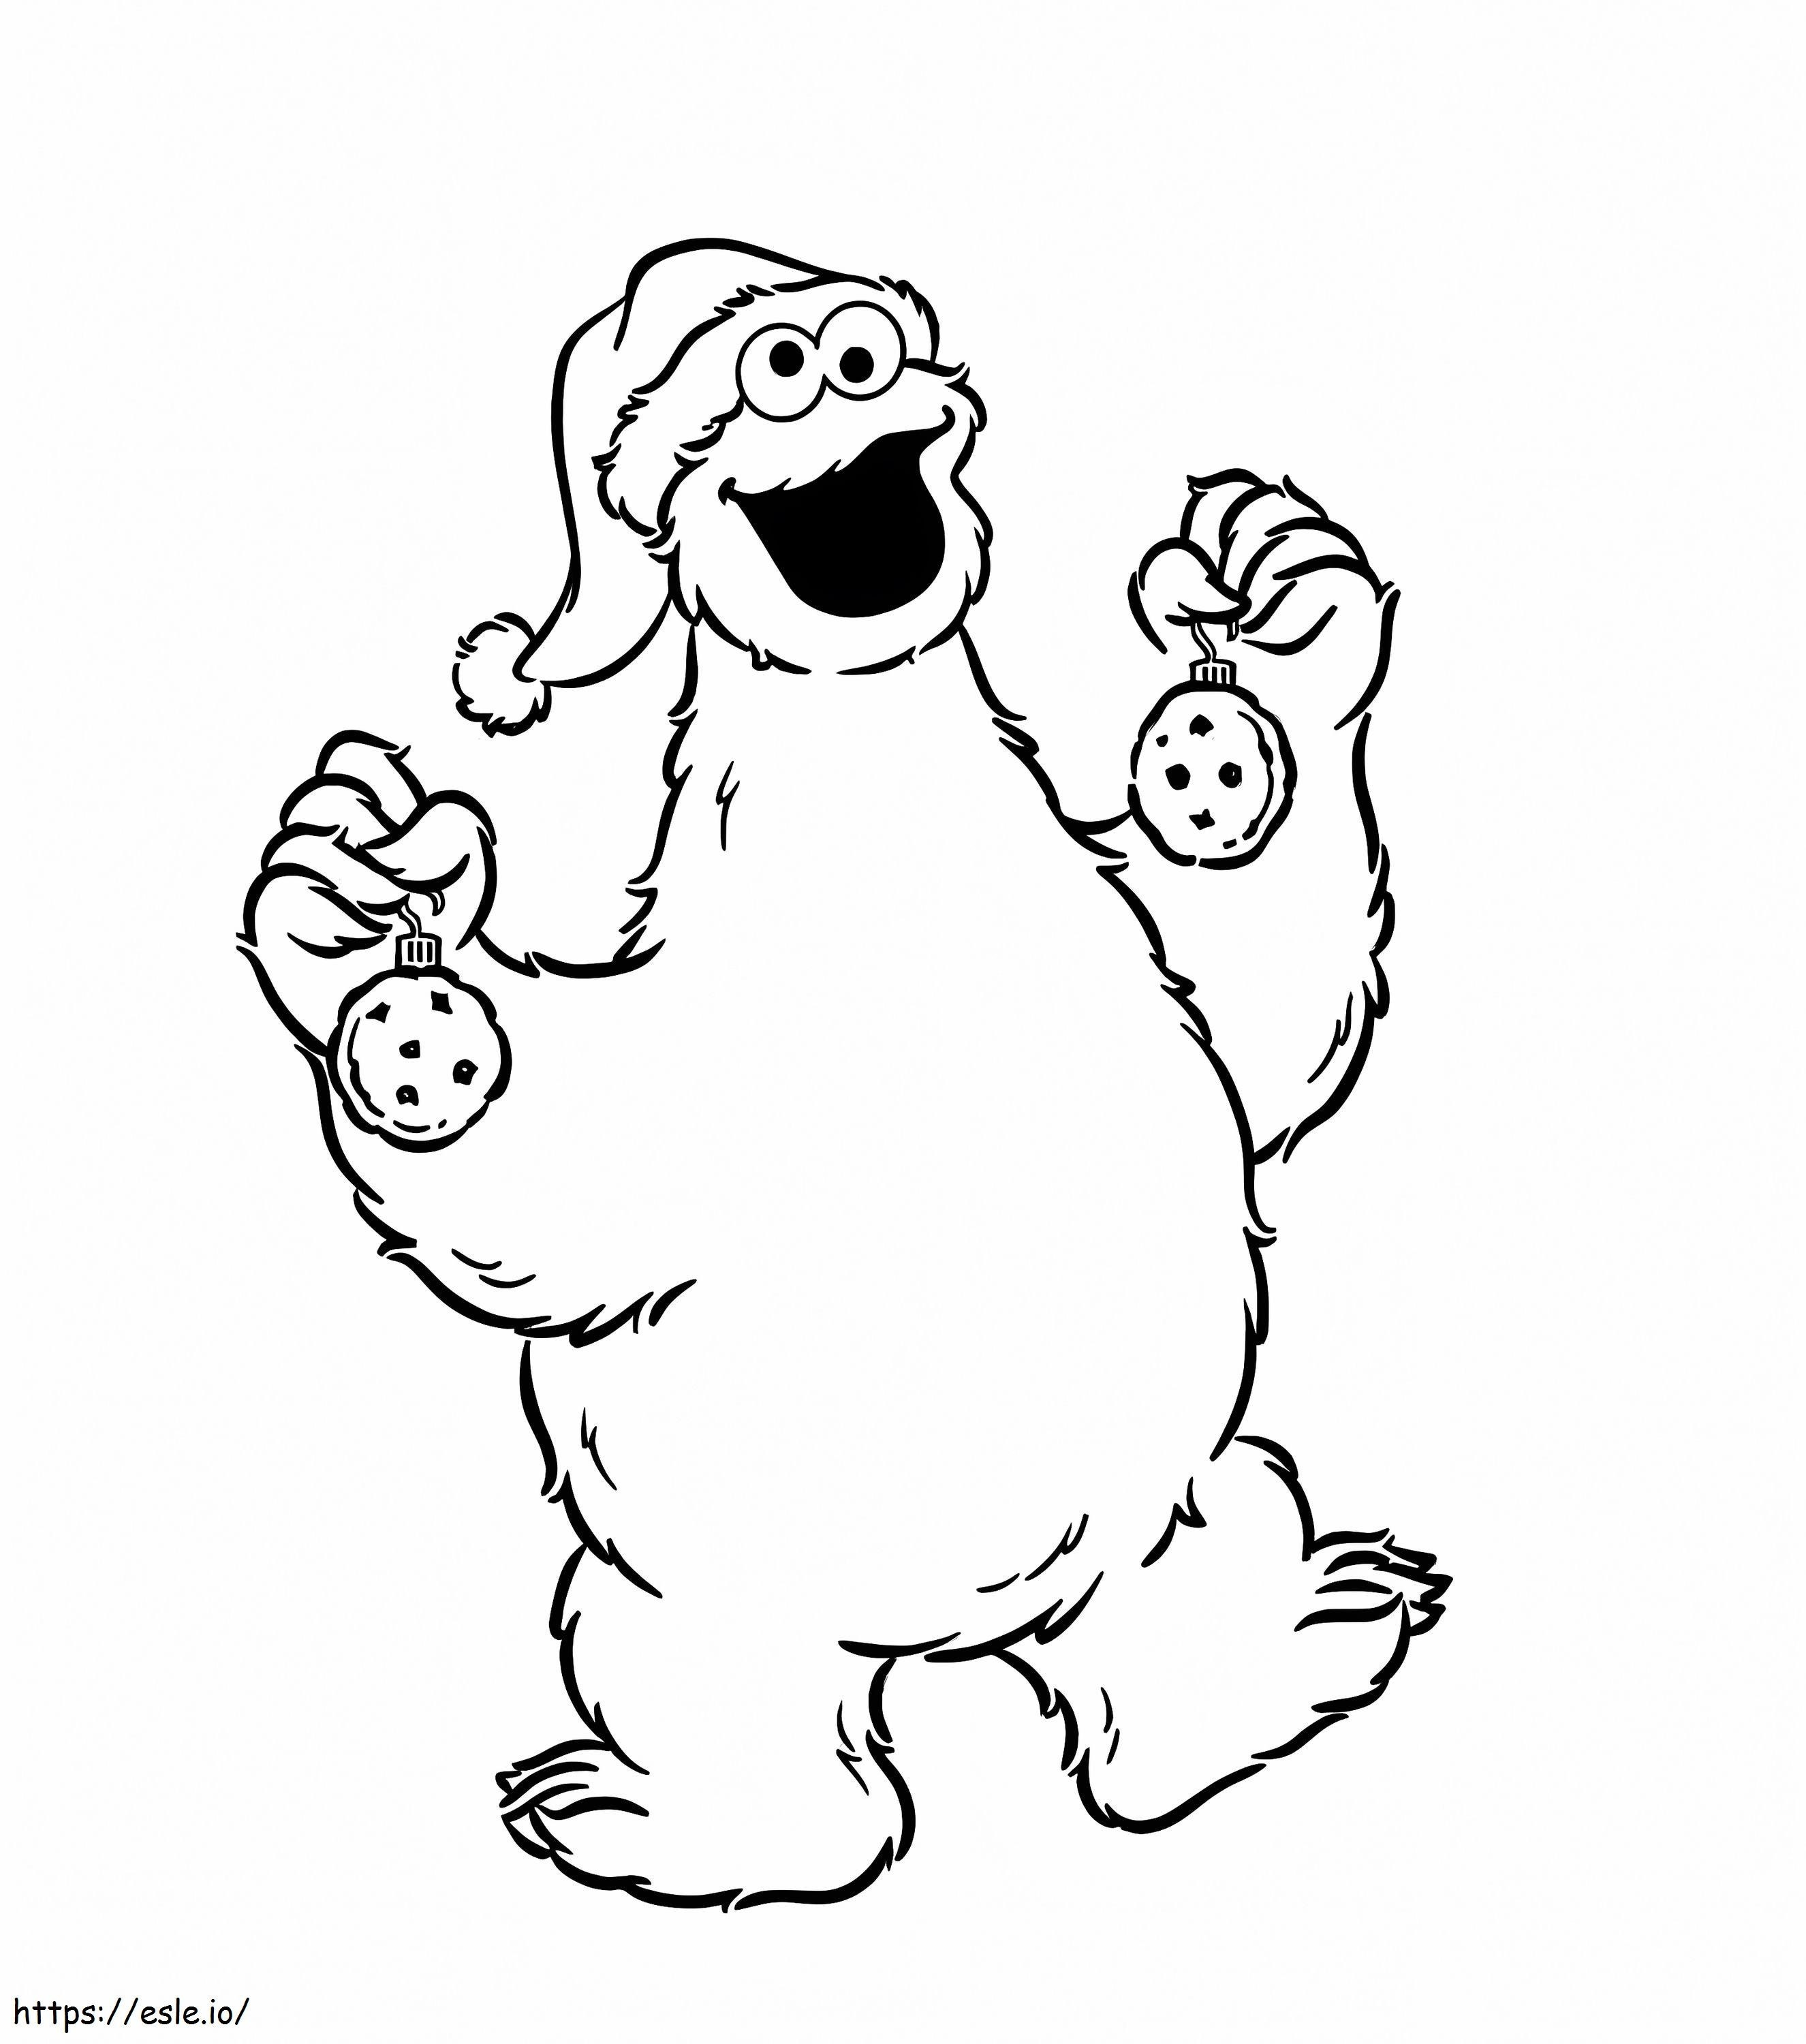 Cookie Monster On Christmas coloring page